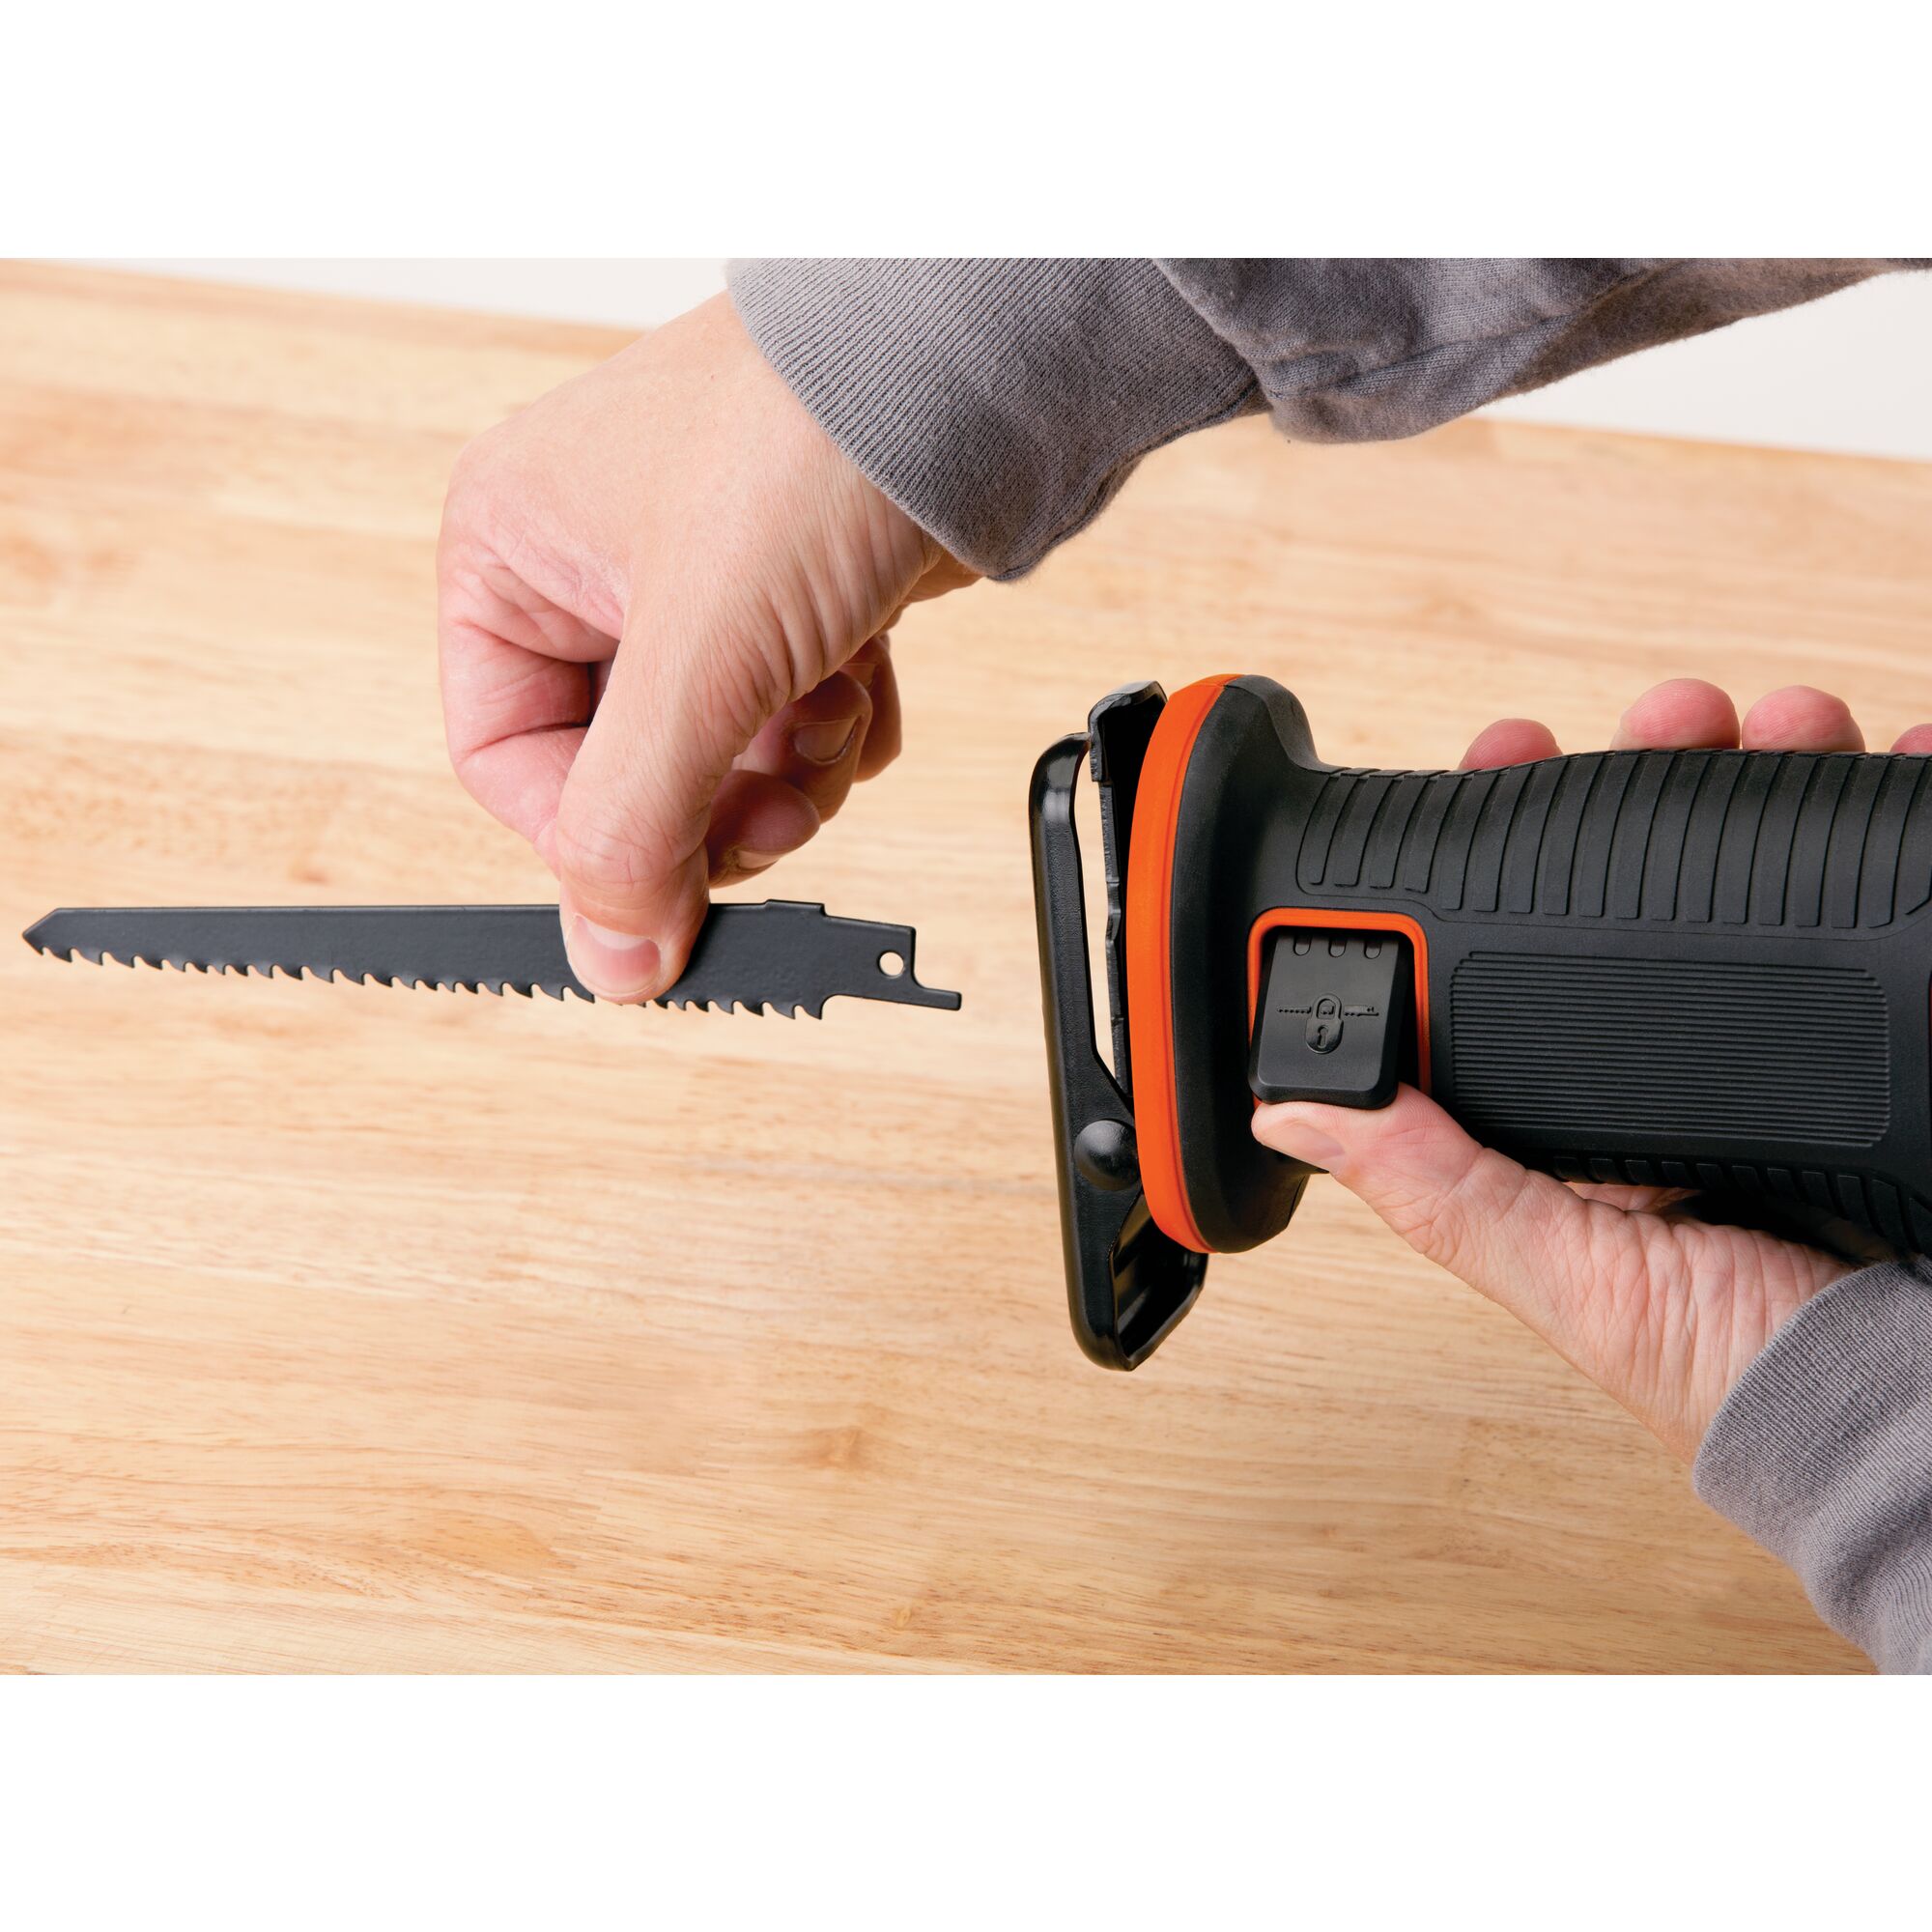 Adjustable blade feature of a cordless reciprocating saw.